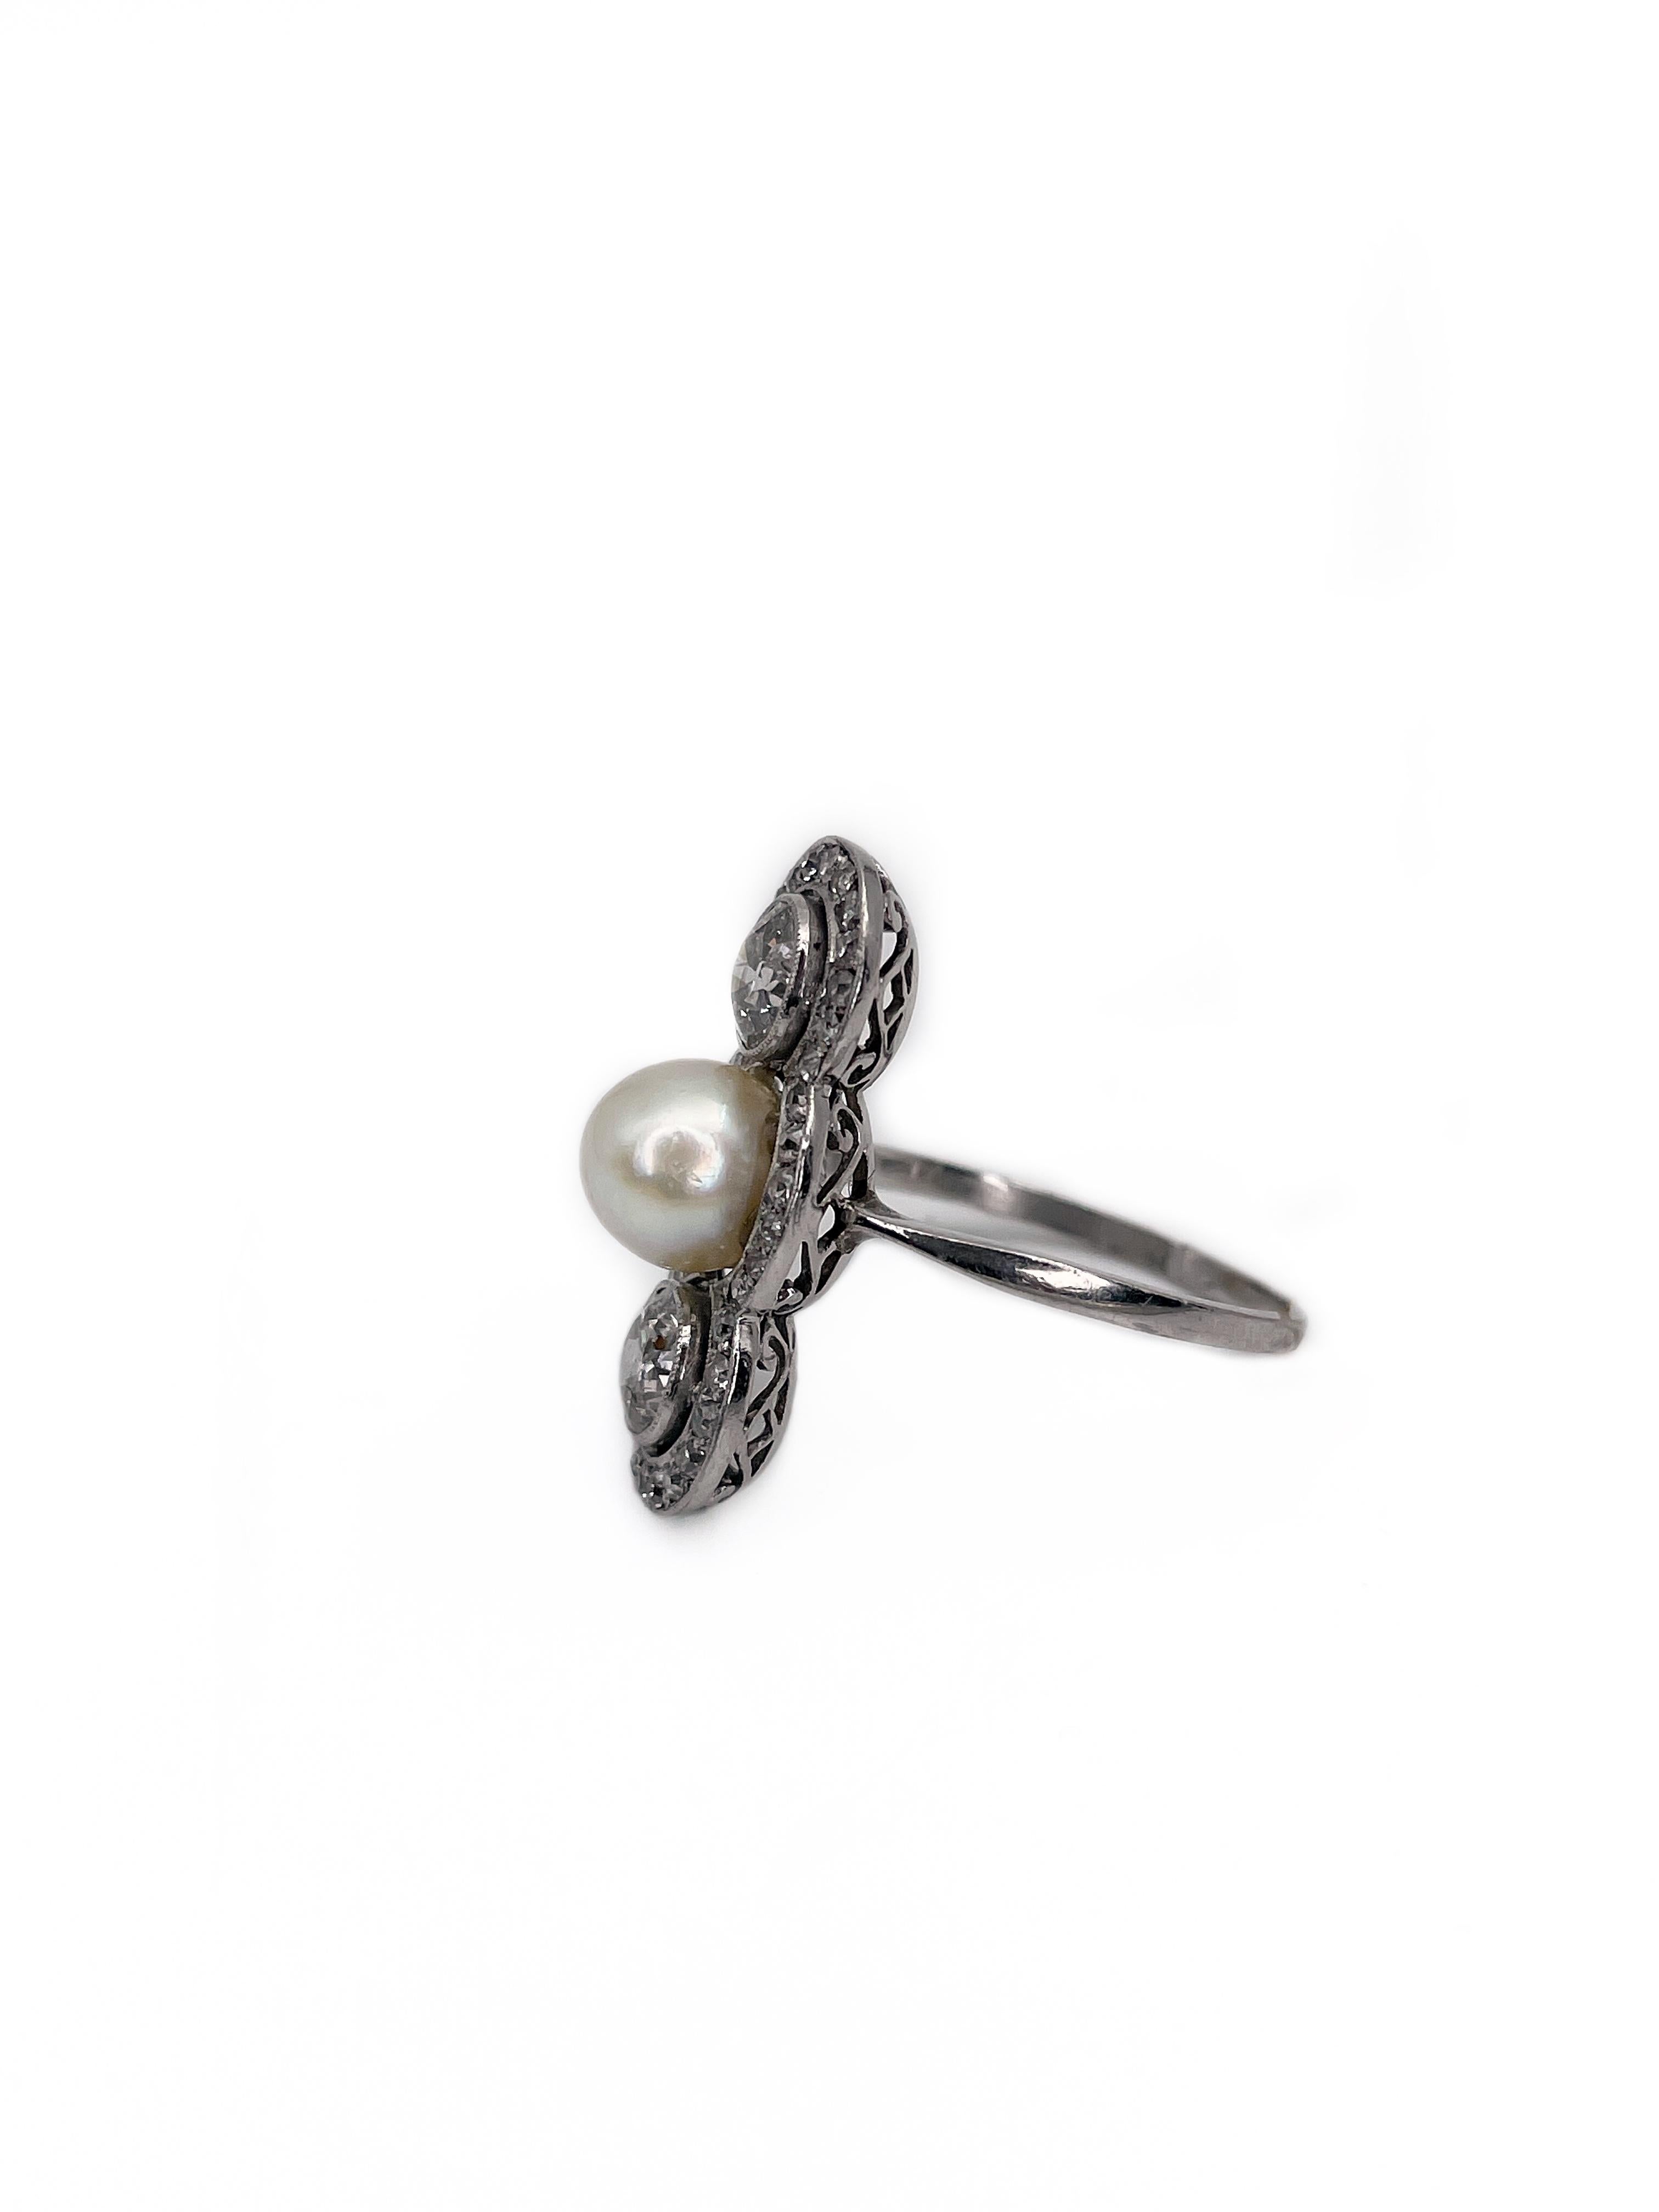 This is a magnificient Art Deco navette ring crafted in 18K white gold. The piece features cultured pearl. It is accompanied with 2 old mine cut diamonds that in total weight 0.80ct, colour - W/STW, clarity - P1. All three gems are surrounded by 38